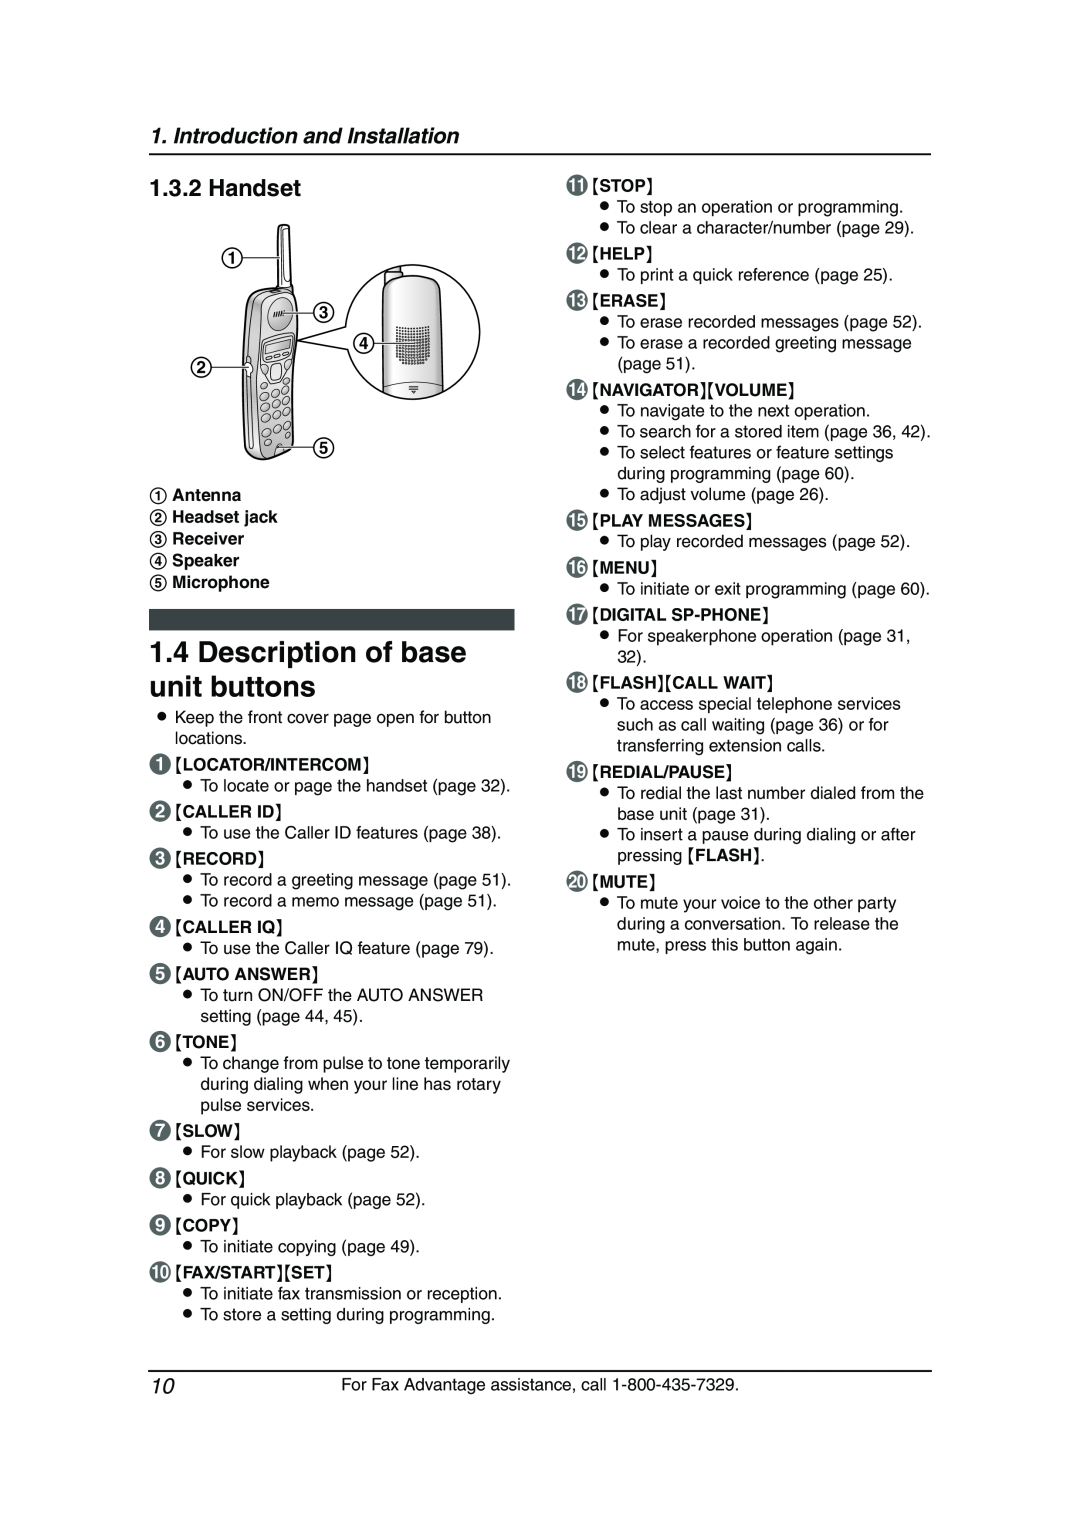 Panasonic KX-FPG376, KX-FPG377 manual Description of base unit buttons, Handset, Introduction and Installation 